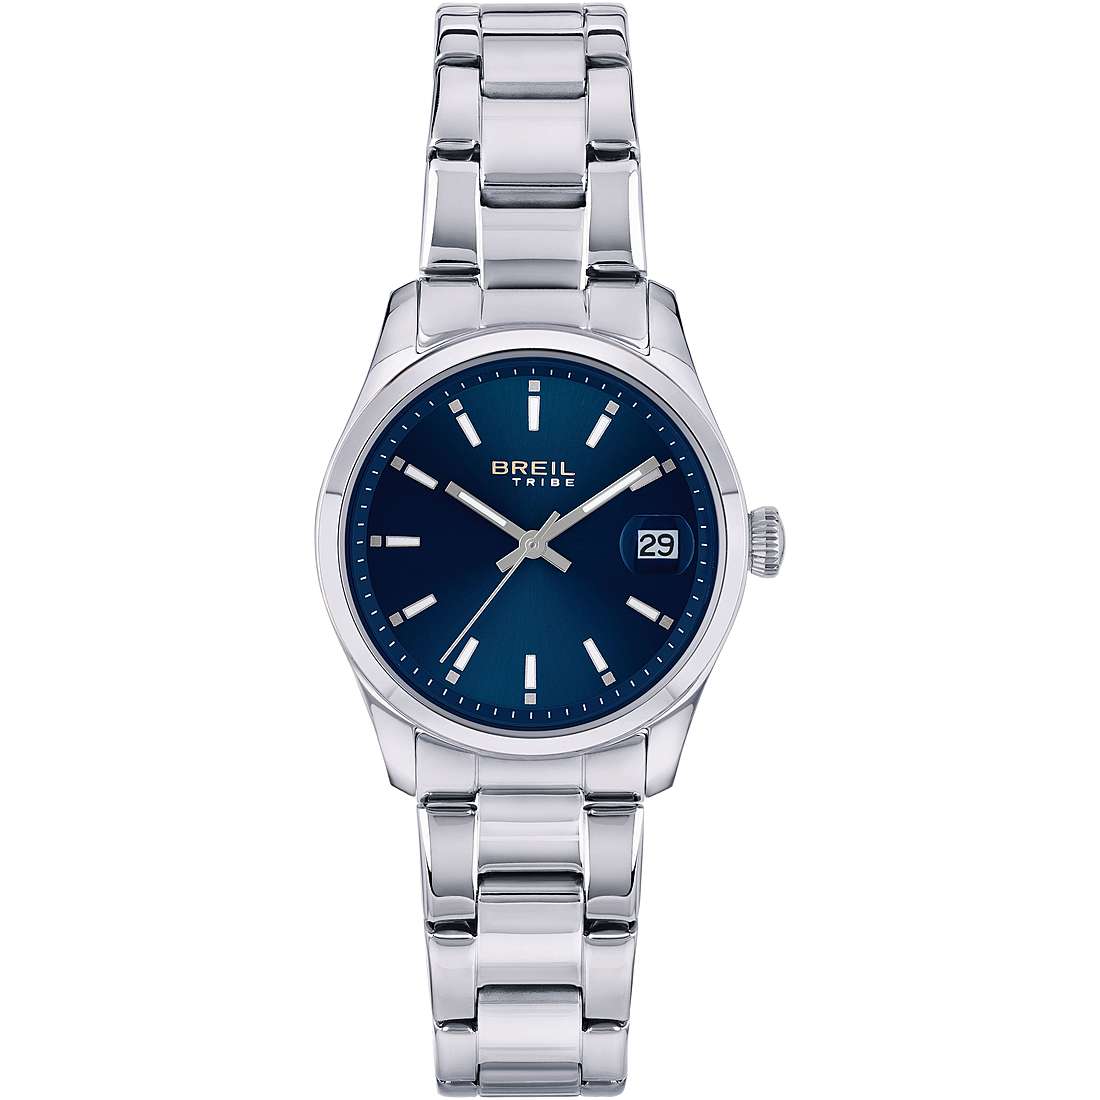 only time watch Steel Blue dial woman Classic Elegance EW0597